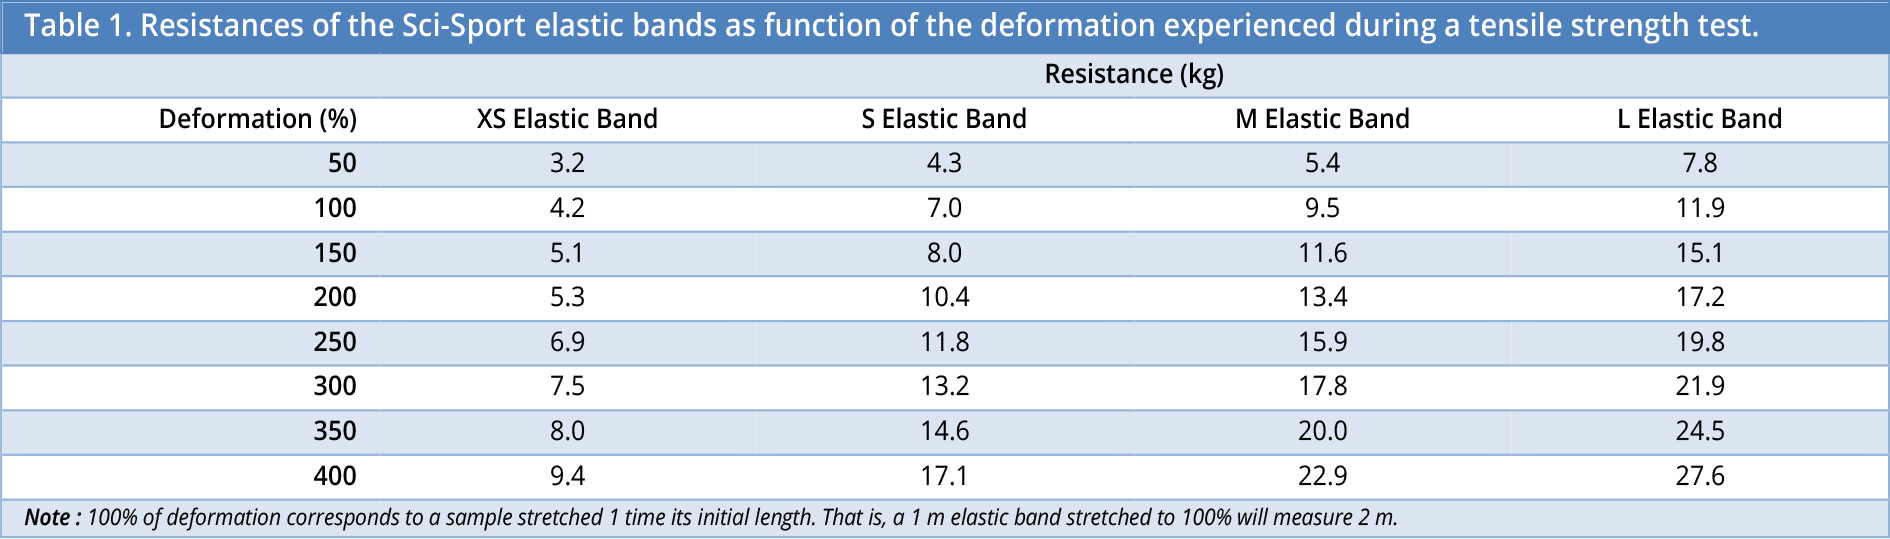 Sciences of Sport  Mechanical characteristics of Sci-Sport elastic bands  during laboratory tensile tests